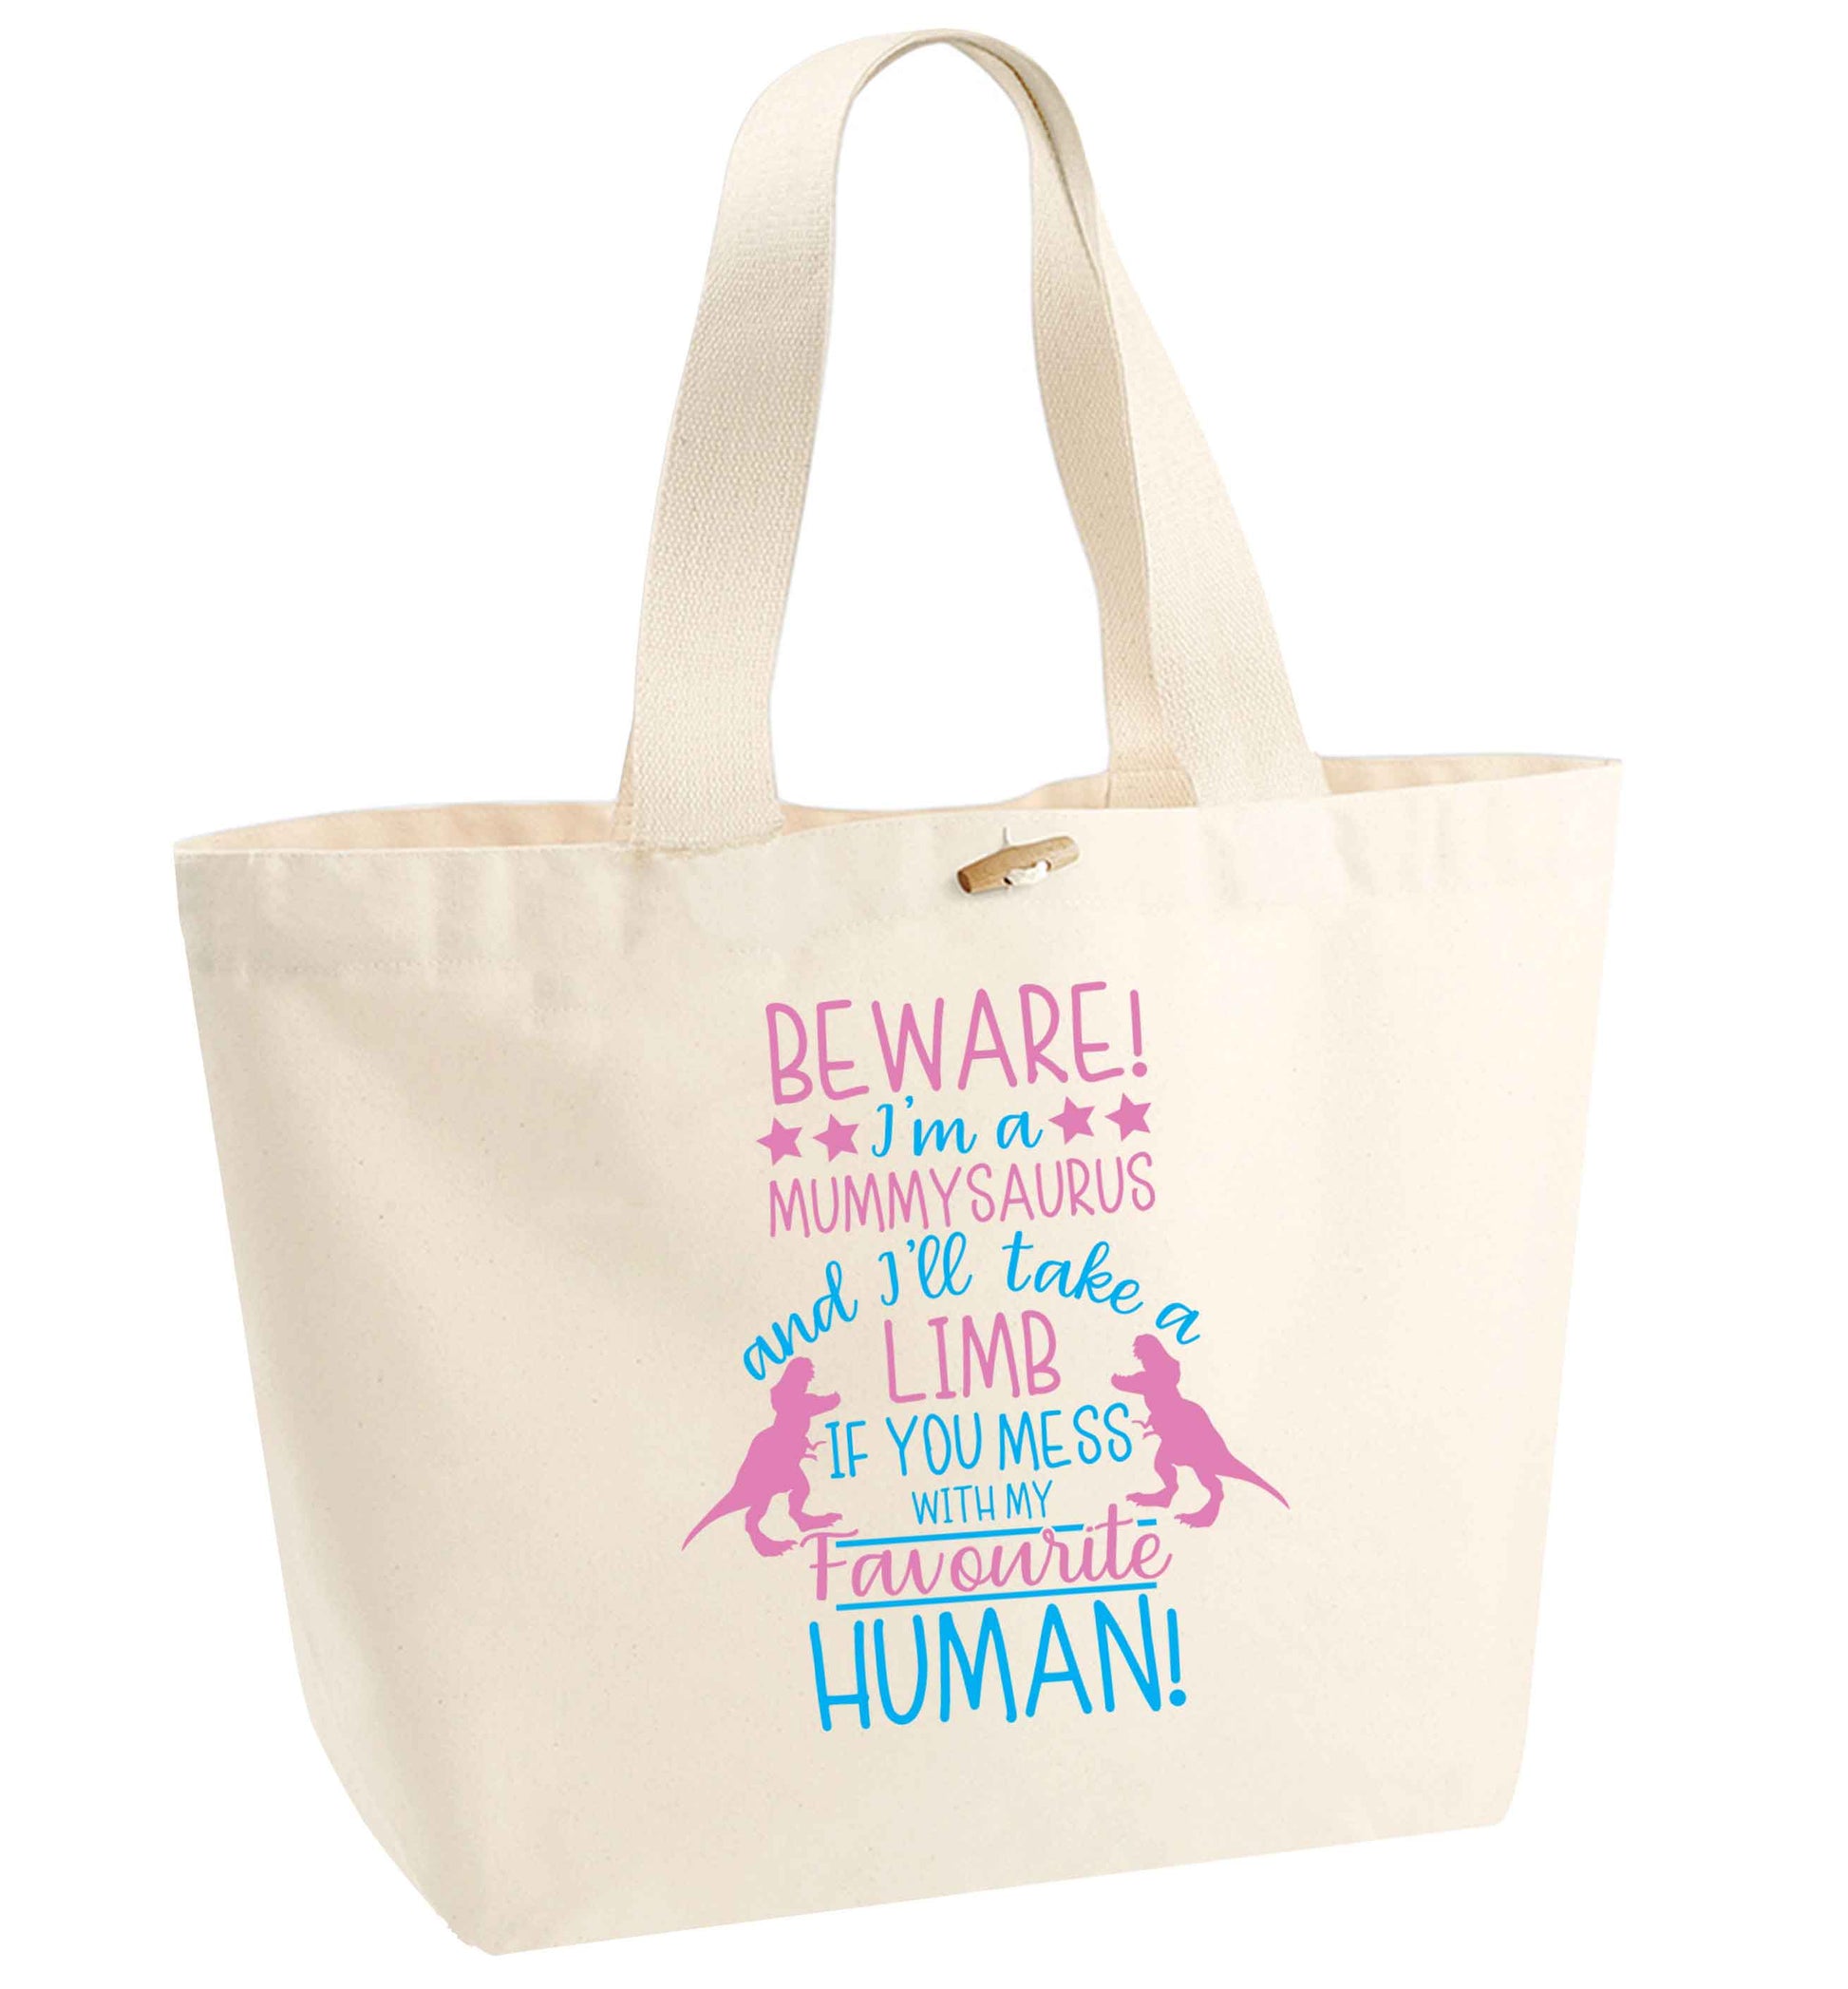 Perfect gift for any protective mummysaurus! Beware I'm a mummysaurus and I'll take a limb if you mess with my favourite human organic cotton premium tote bag with wooden toggle in natural